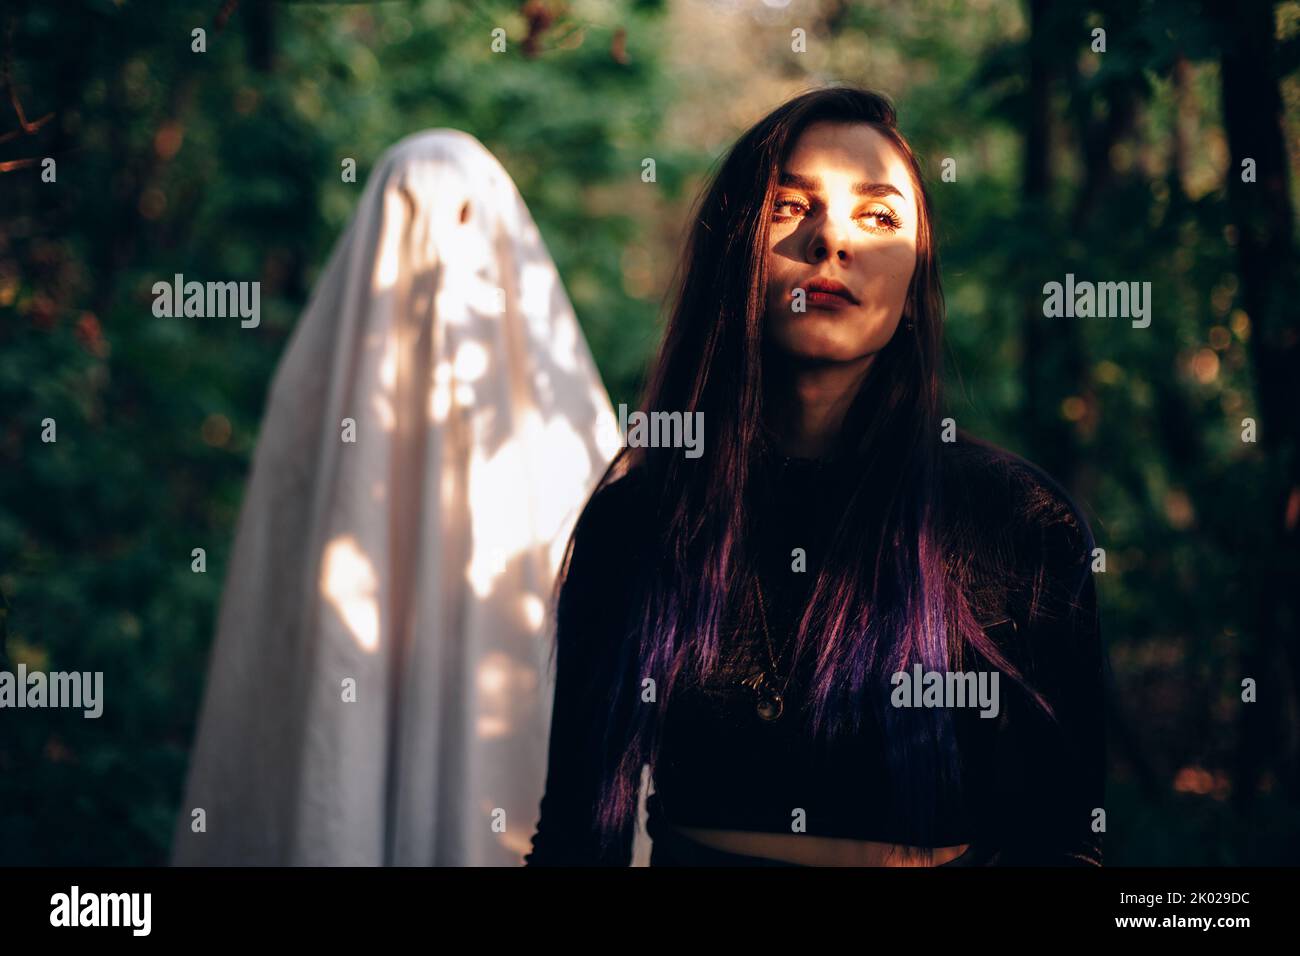 Ghost standing behind young woman in forest during Halloween Stock Photo